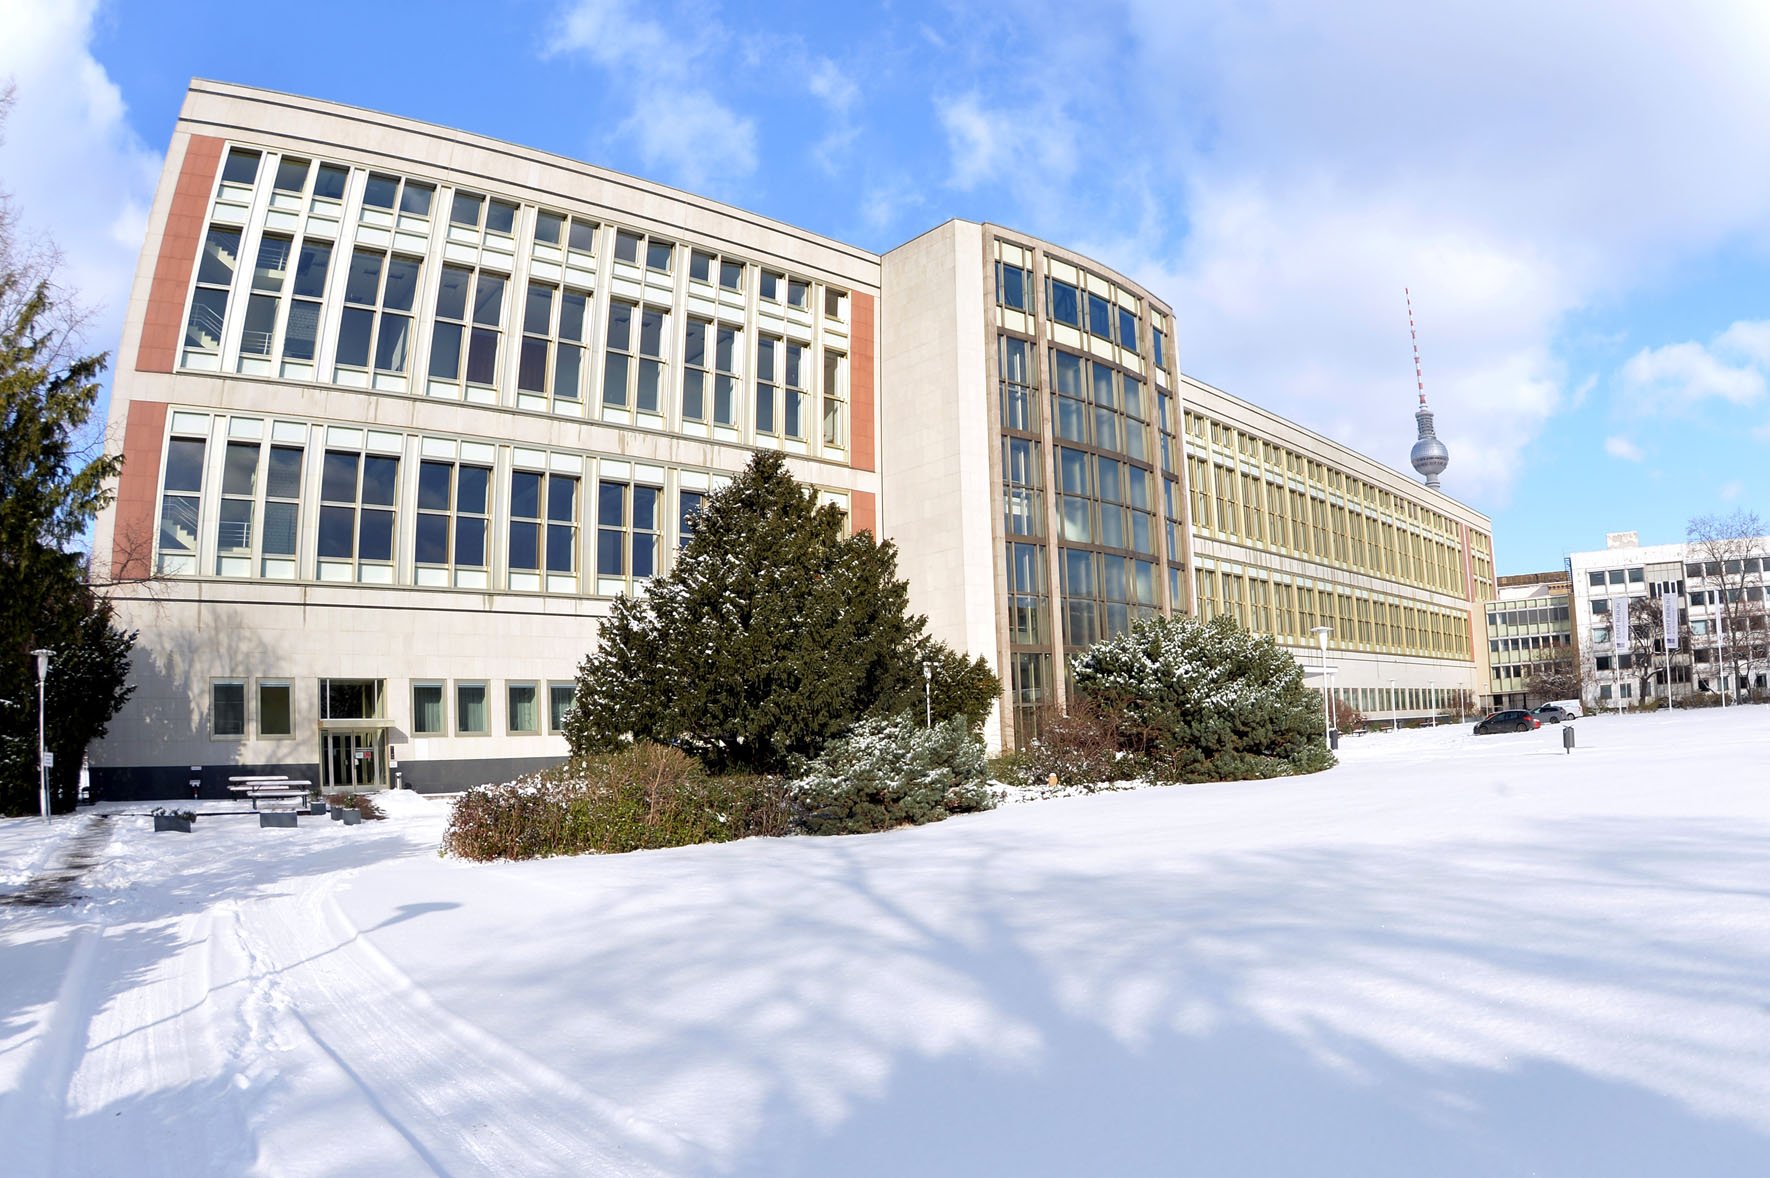 Picture of ESMT building during the winter with snow on the ground.